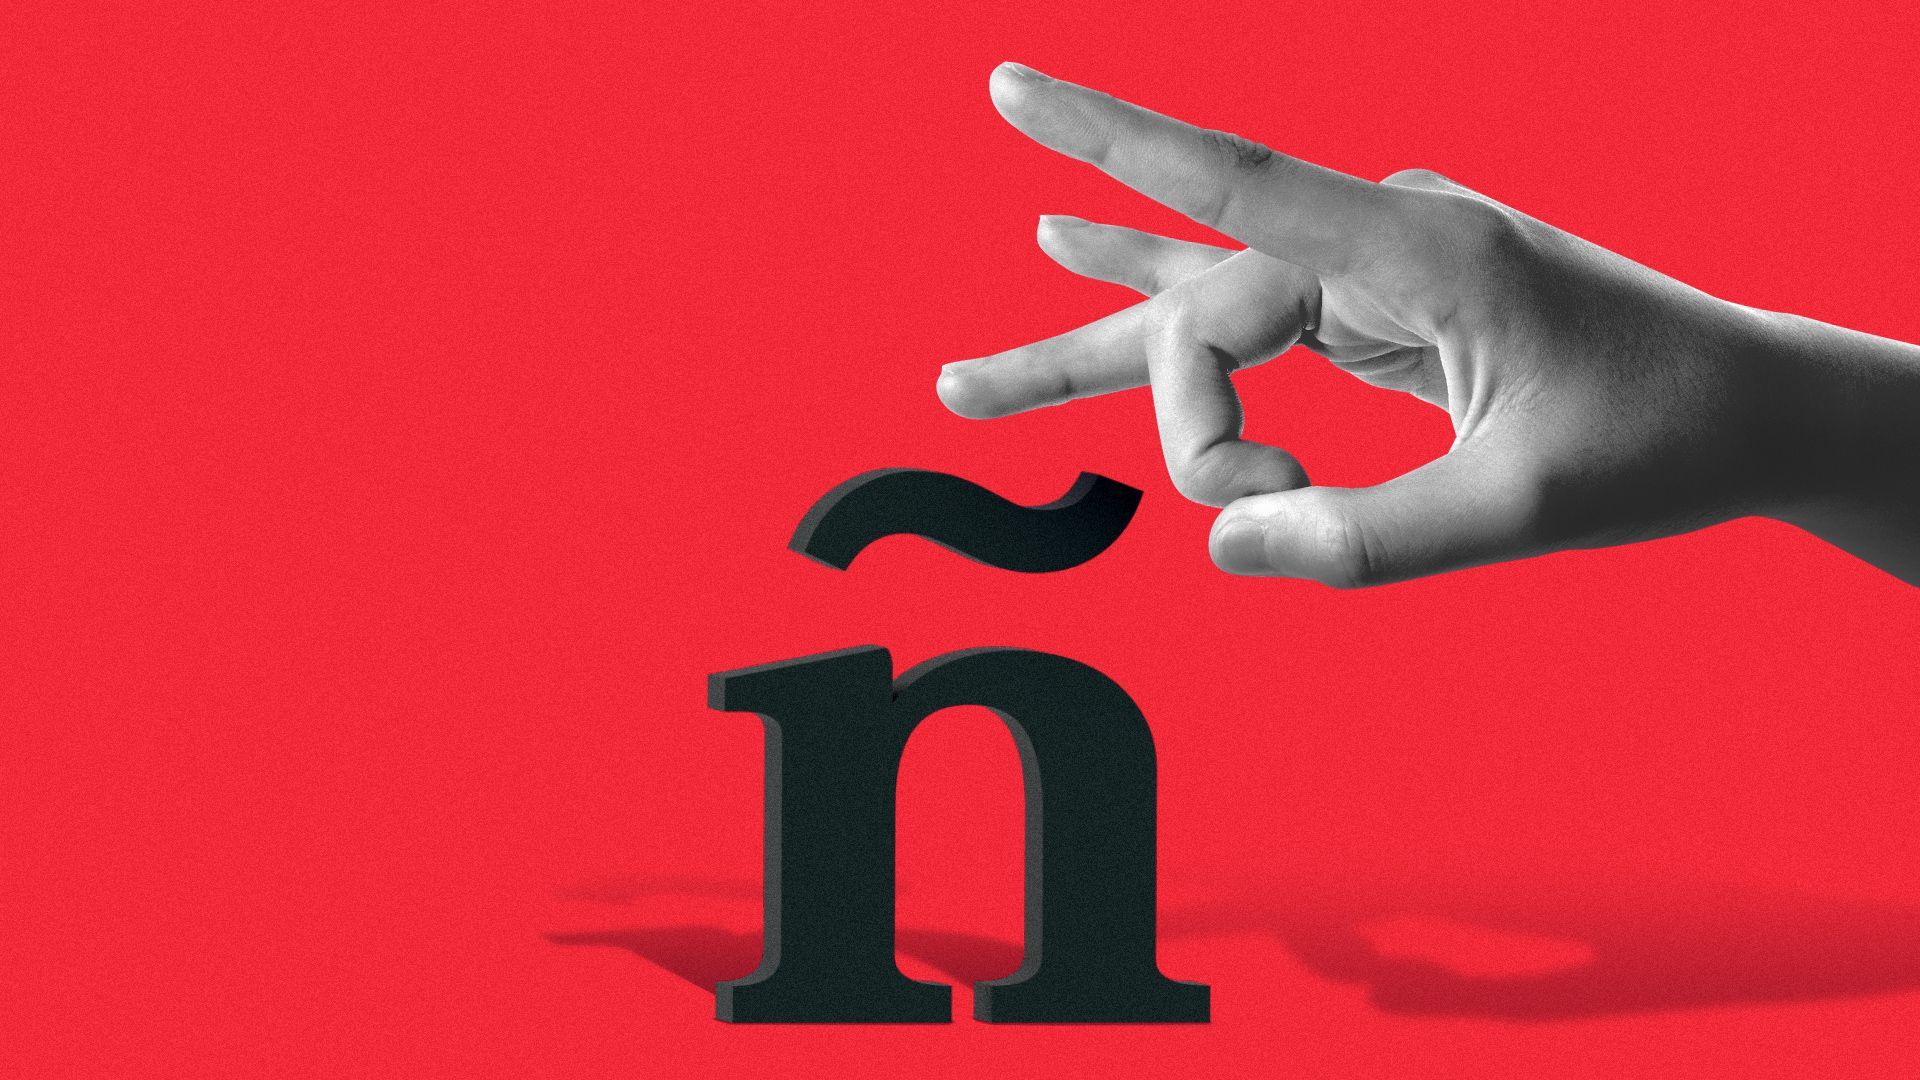 Illustration of a hand flicking the tilde accent mark off of a letter "n". 